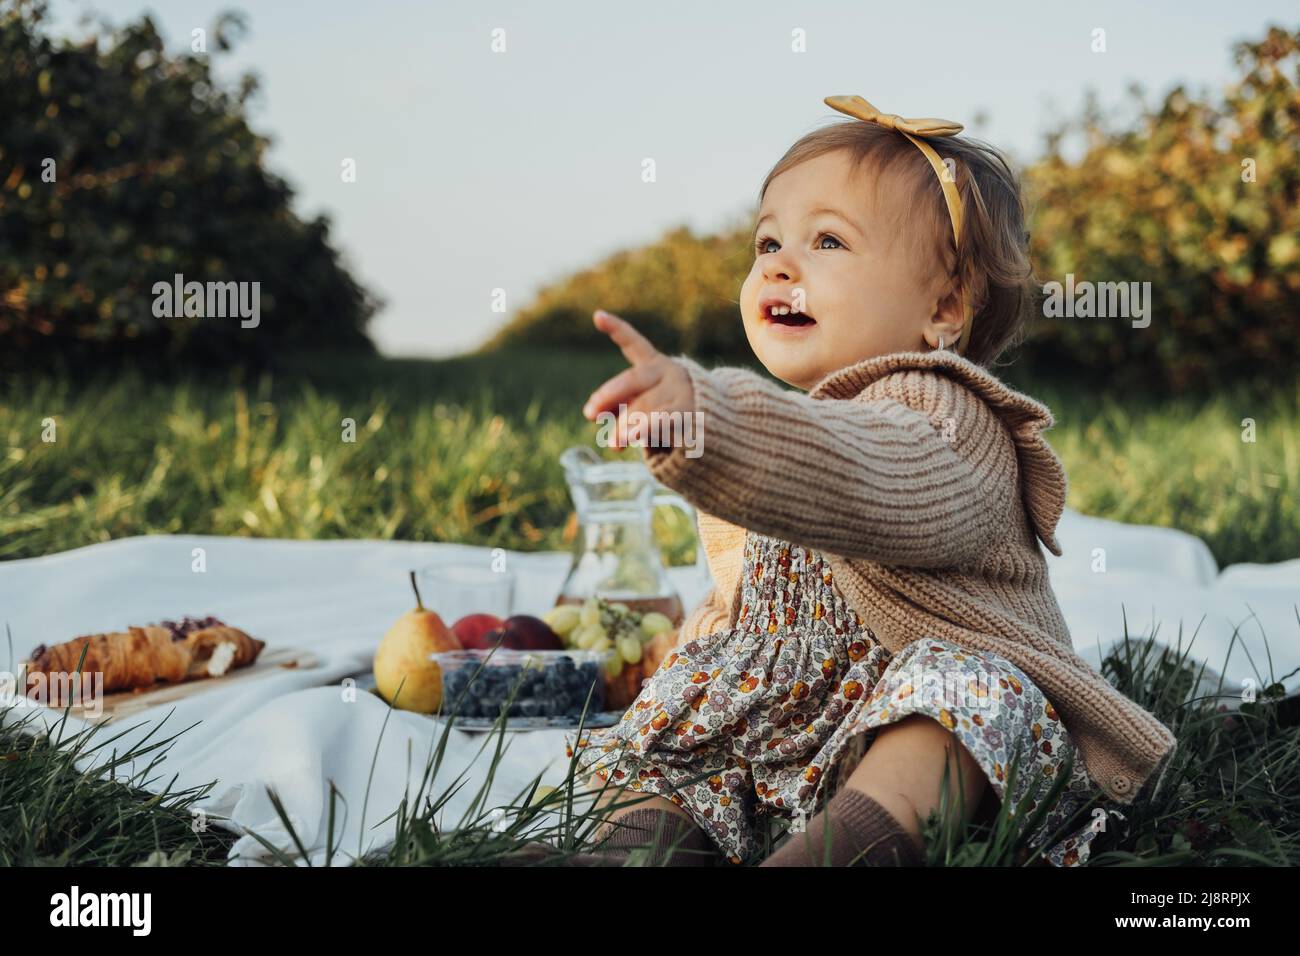 Portrait of Little Baby Girl Sitting on a Plaid on Picnic Outdoors at Sunset Stock Photo